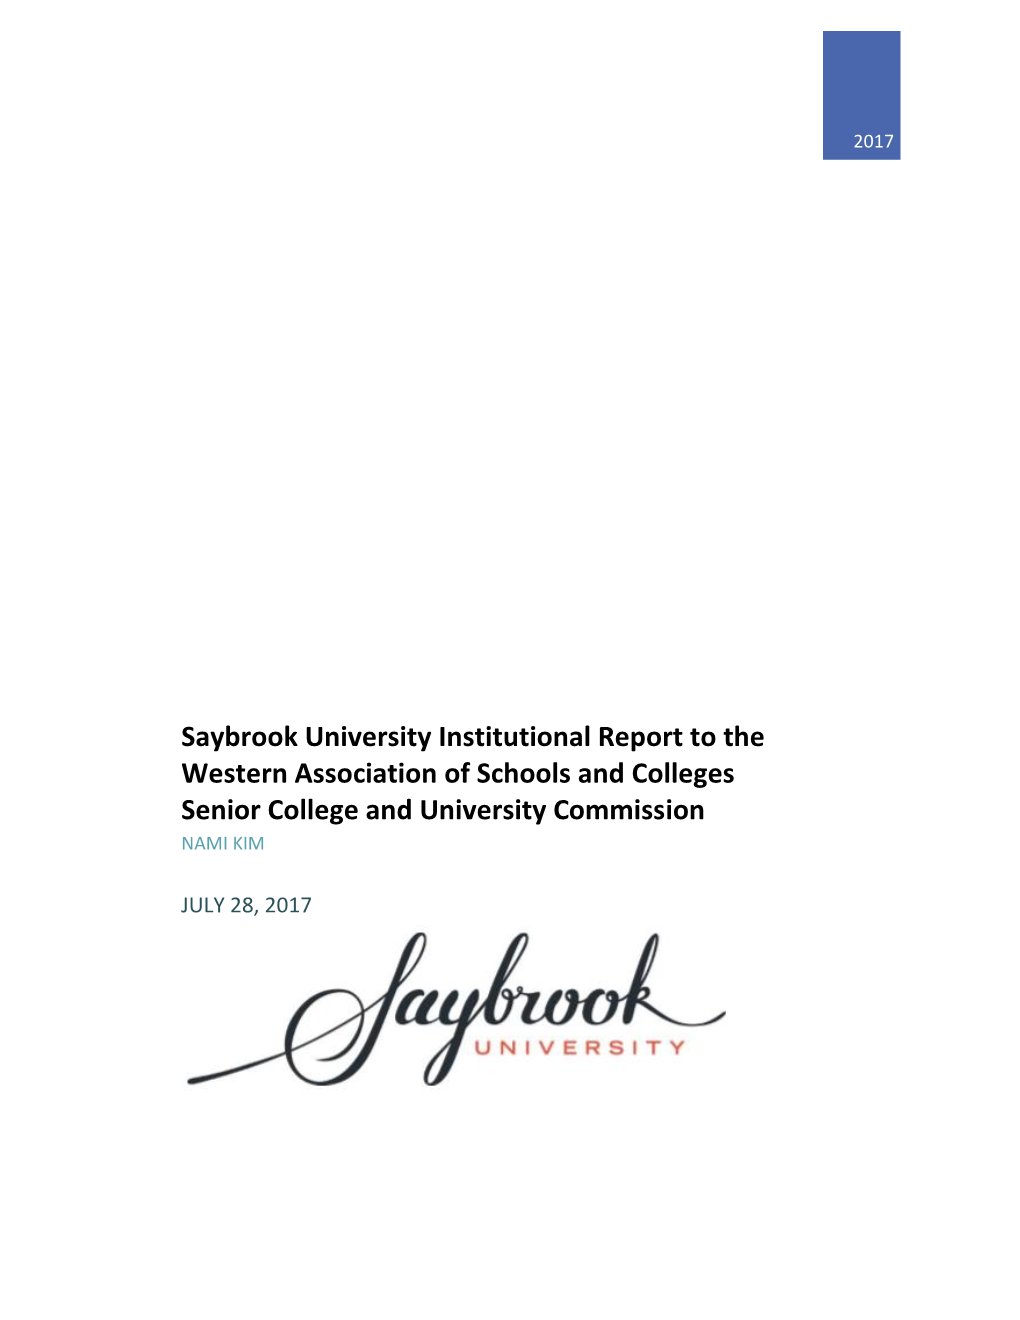 Saybrook Institutional Report July 2017